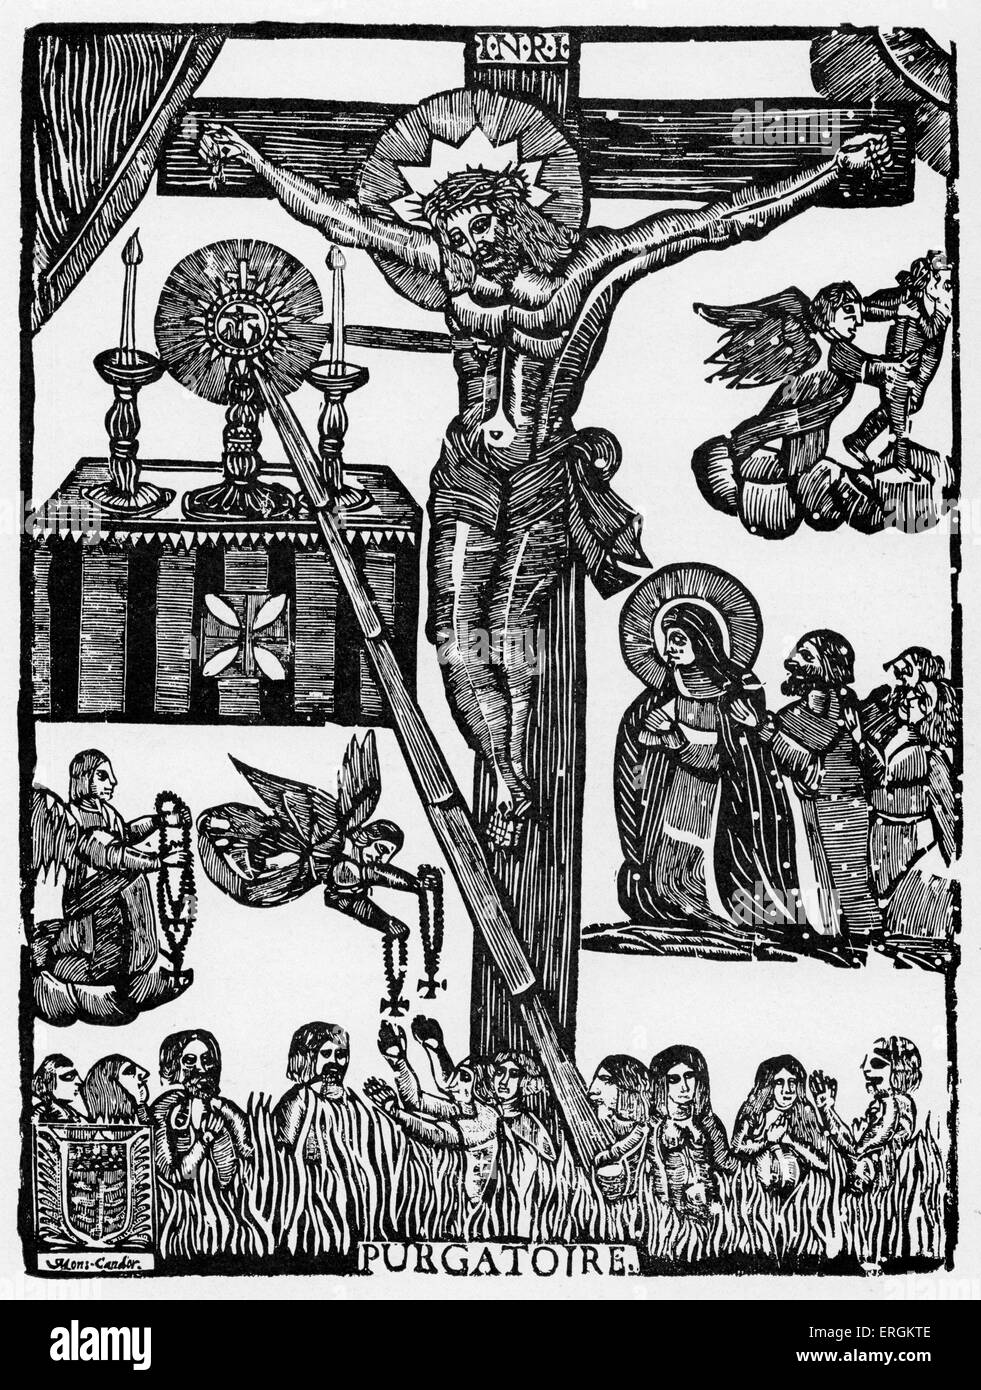 Purgatory (French: Purgatoire) - from wood engraving from  Montauban, France.  Beginning of 17th cenutry. Bottom left: coat of Stock Photo